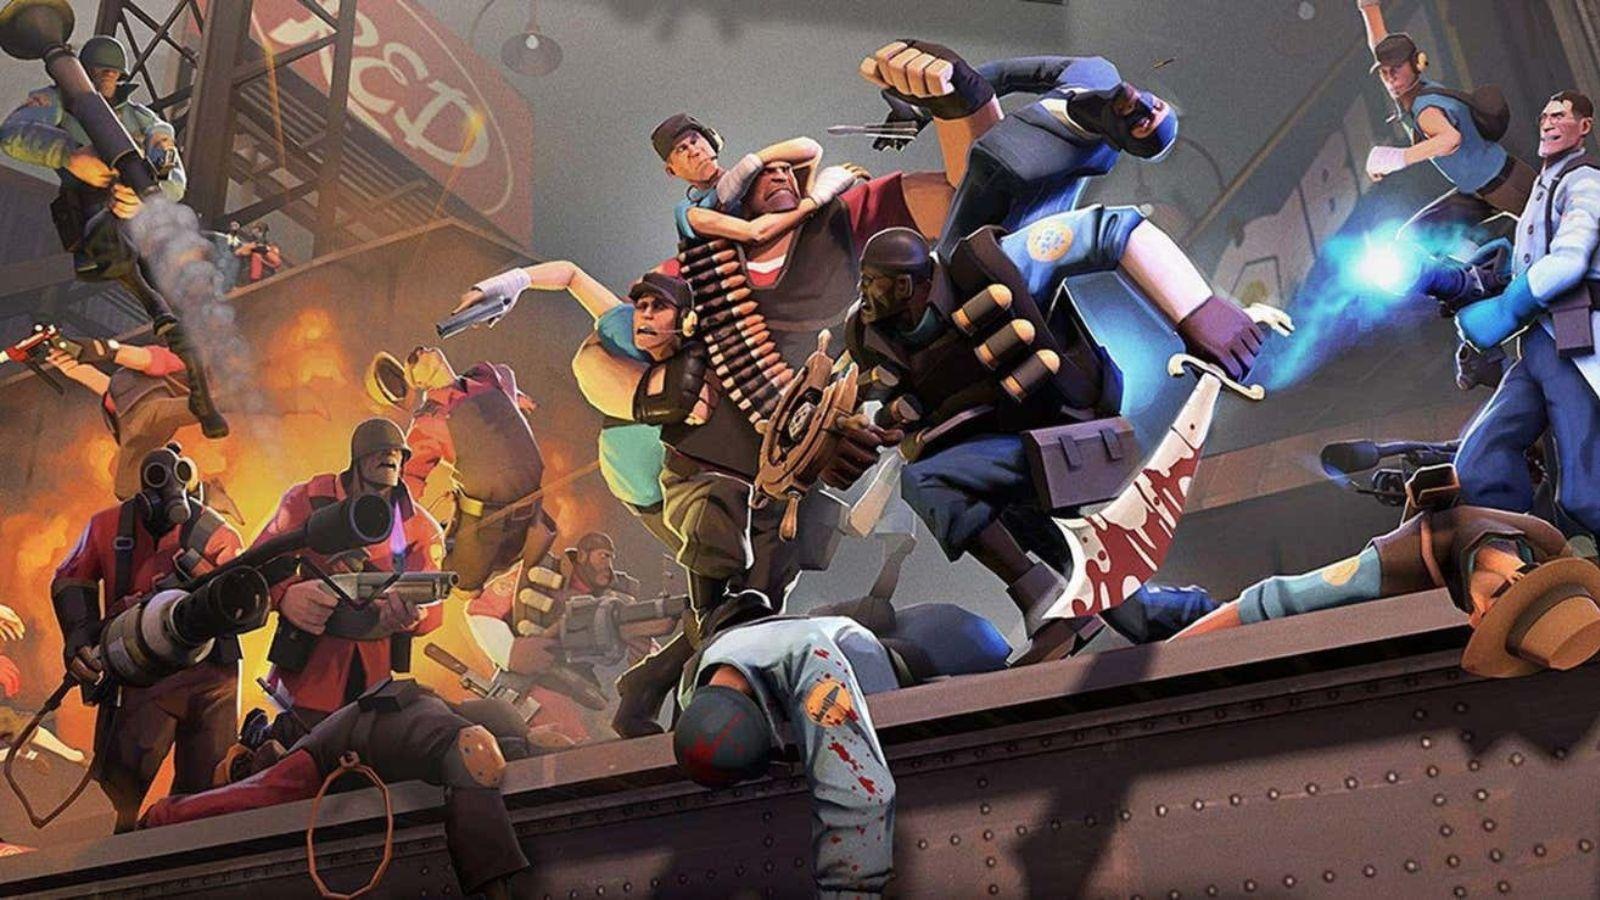 Team Fortress 2 now has 100 player battles